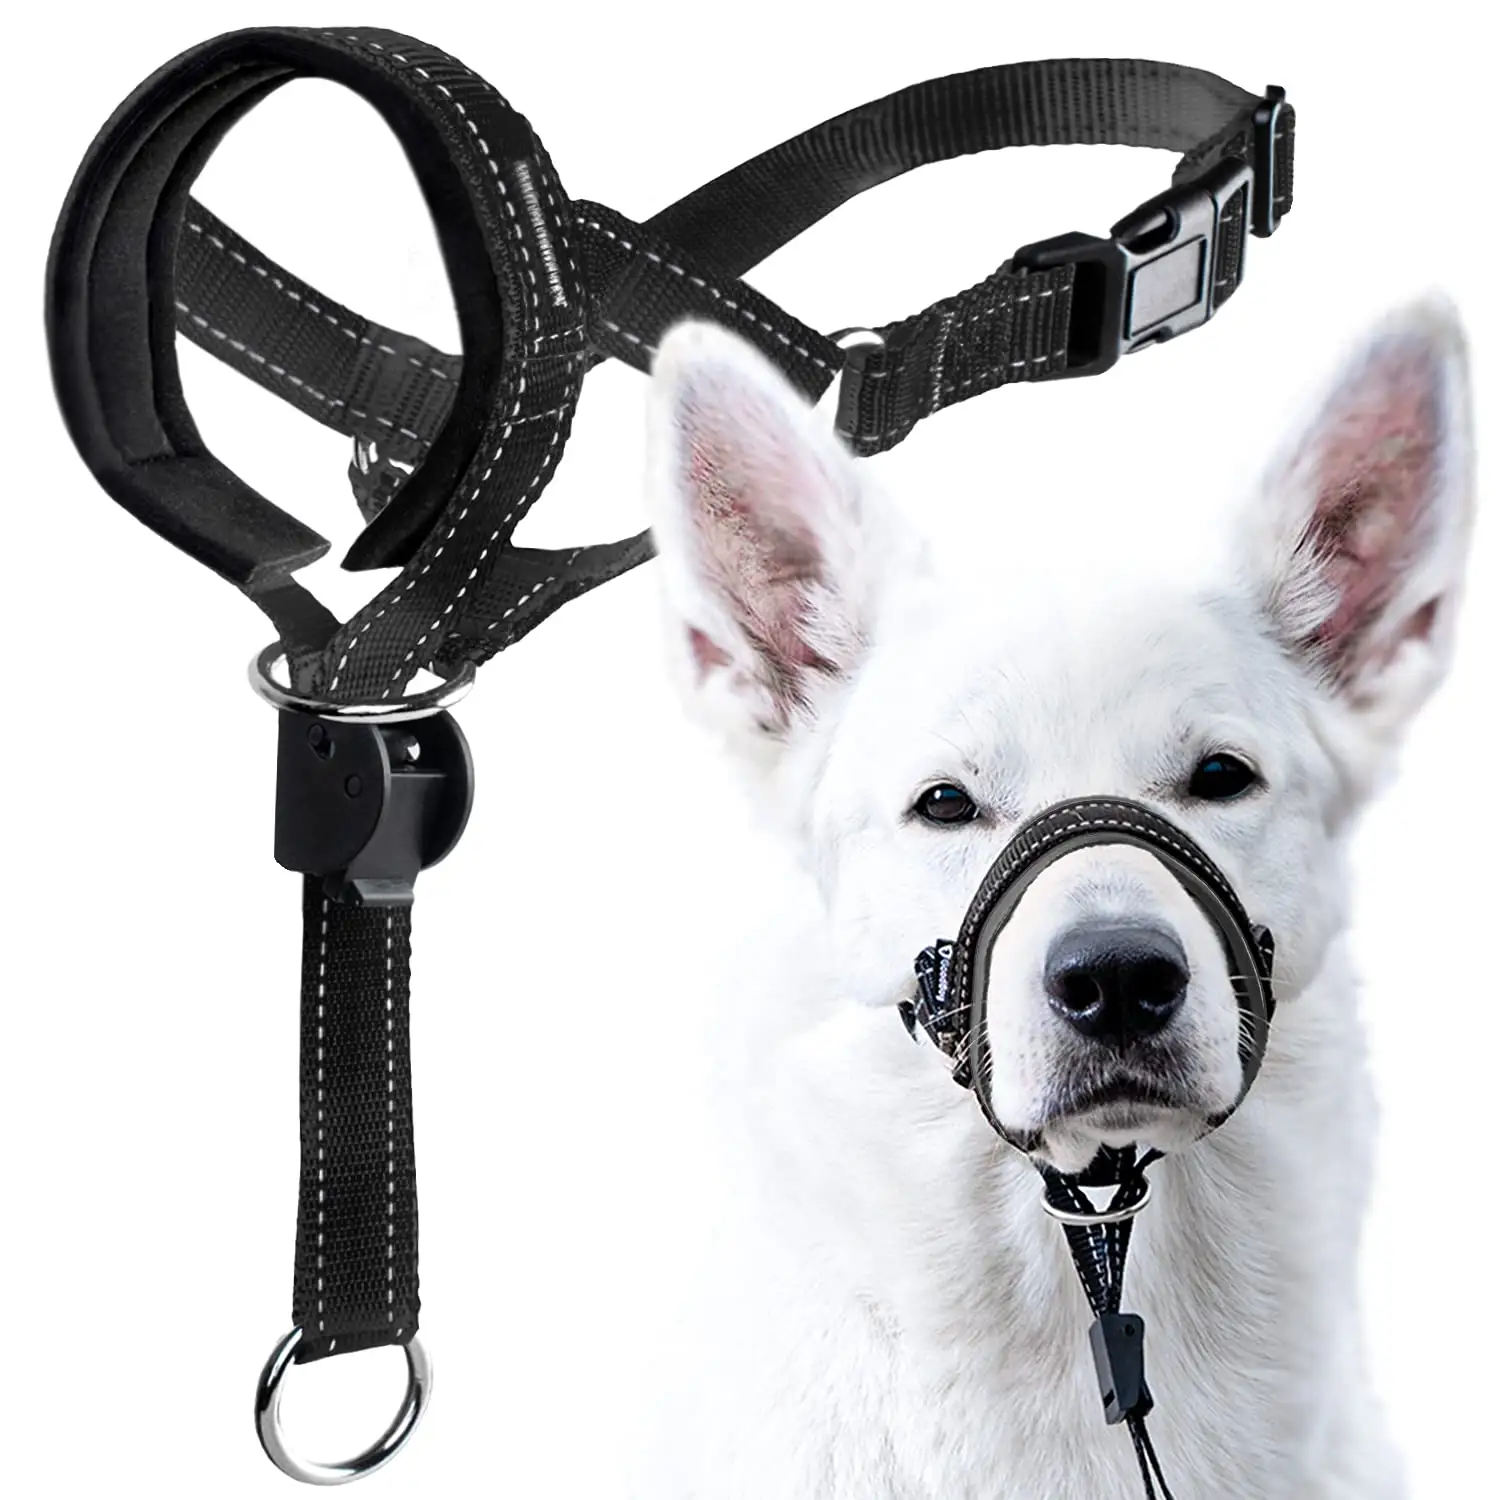 Dog Head Halter with Safety Strap Stops Heavy Pulling On The Leash Padded Head Collar for Small Medium and Large Dog Sizes